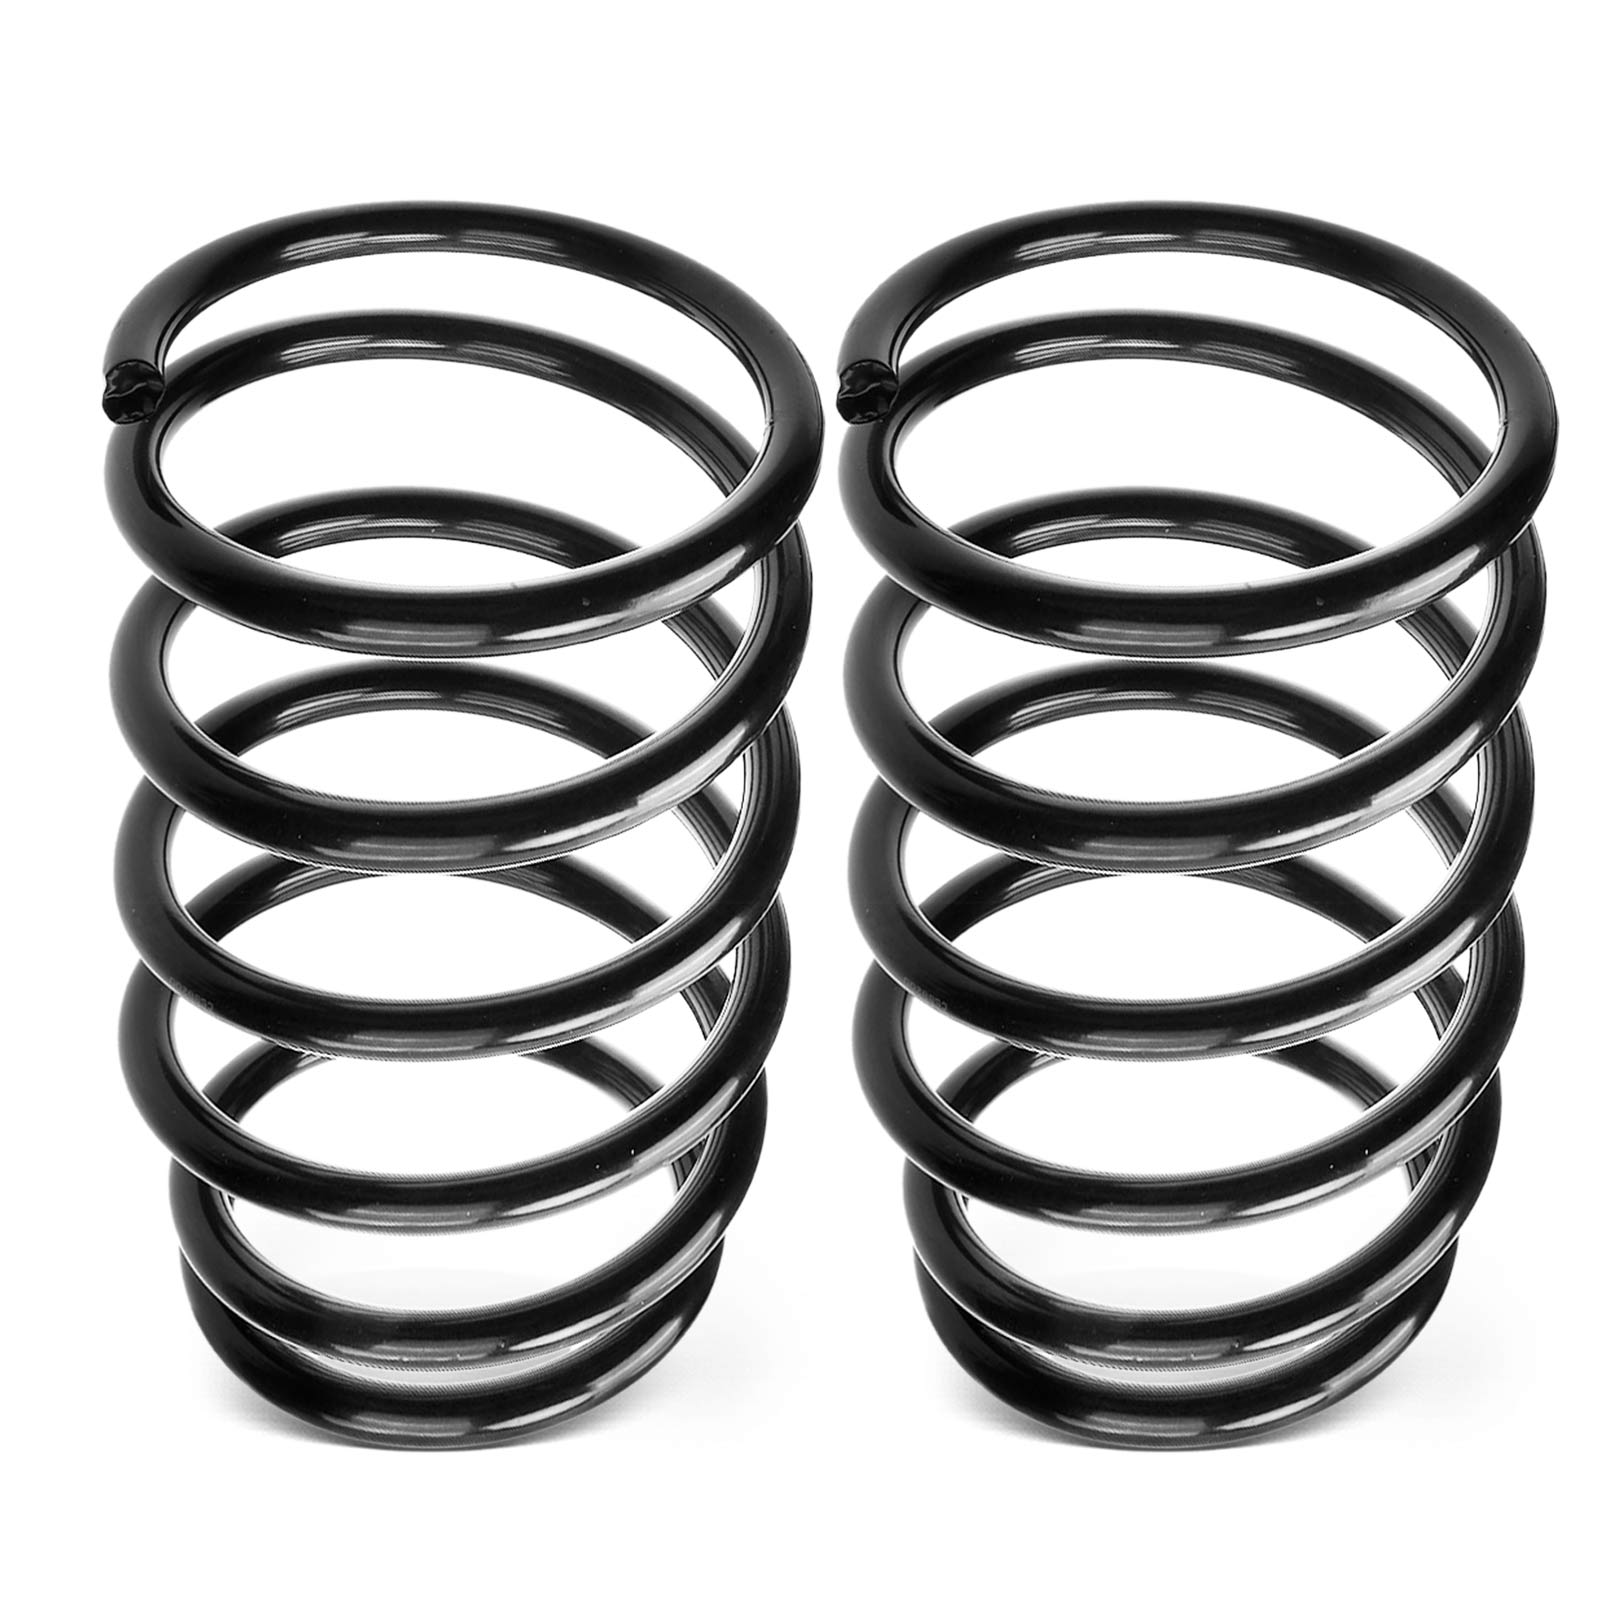 A-Premium 2Pcs Front Suspension Coil Spring Set Compatible with Ford Escort 1991-1996 & Mazda Protege 1991-1998 & Mercury Tracer, Driver and Passenger Side - image 1 of 6